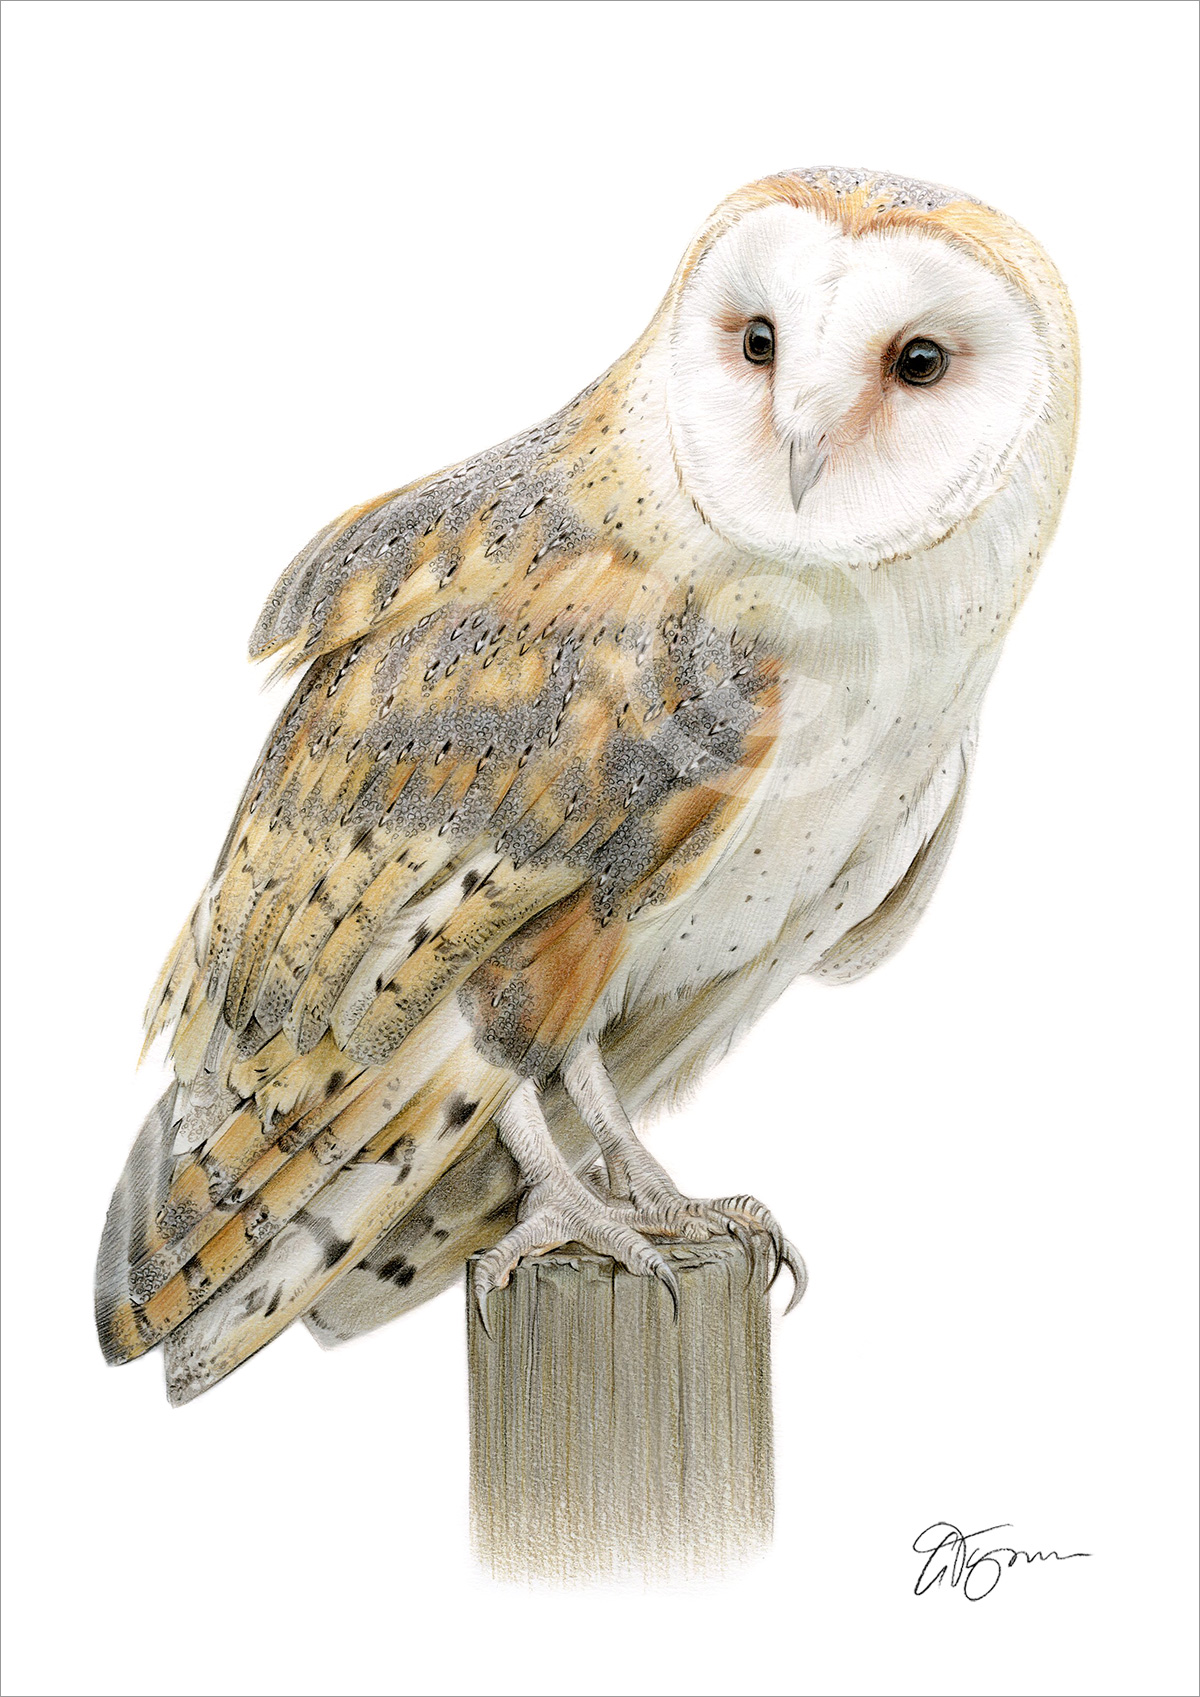 Colour pencil drawing of a barn owl sitting on a post by artist Gary Tymon